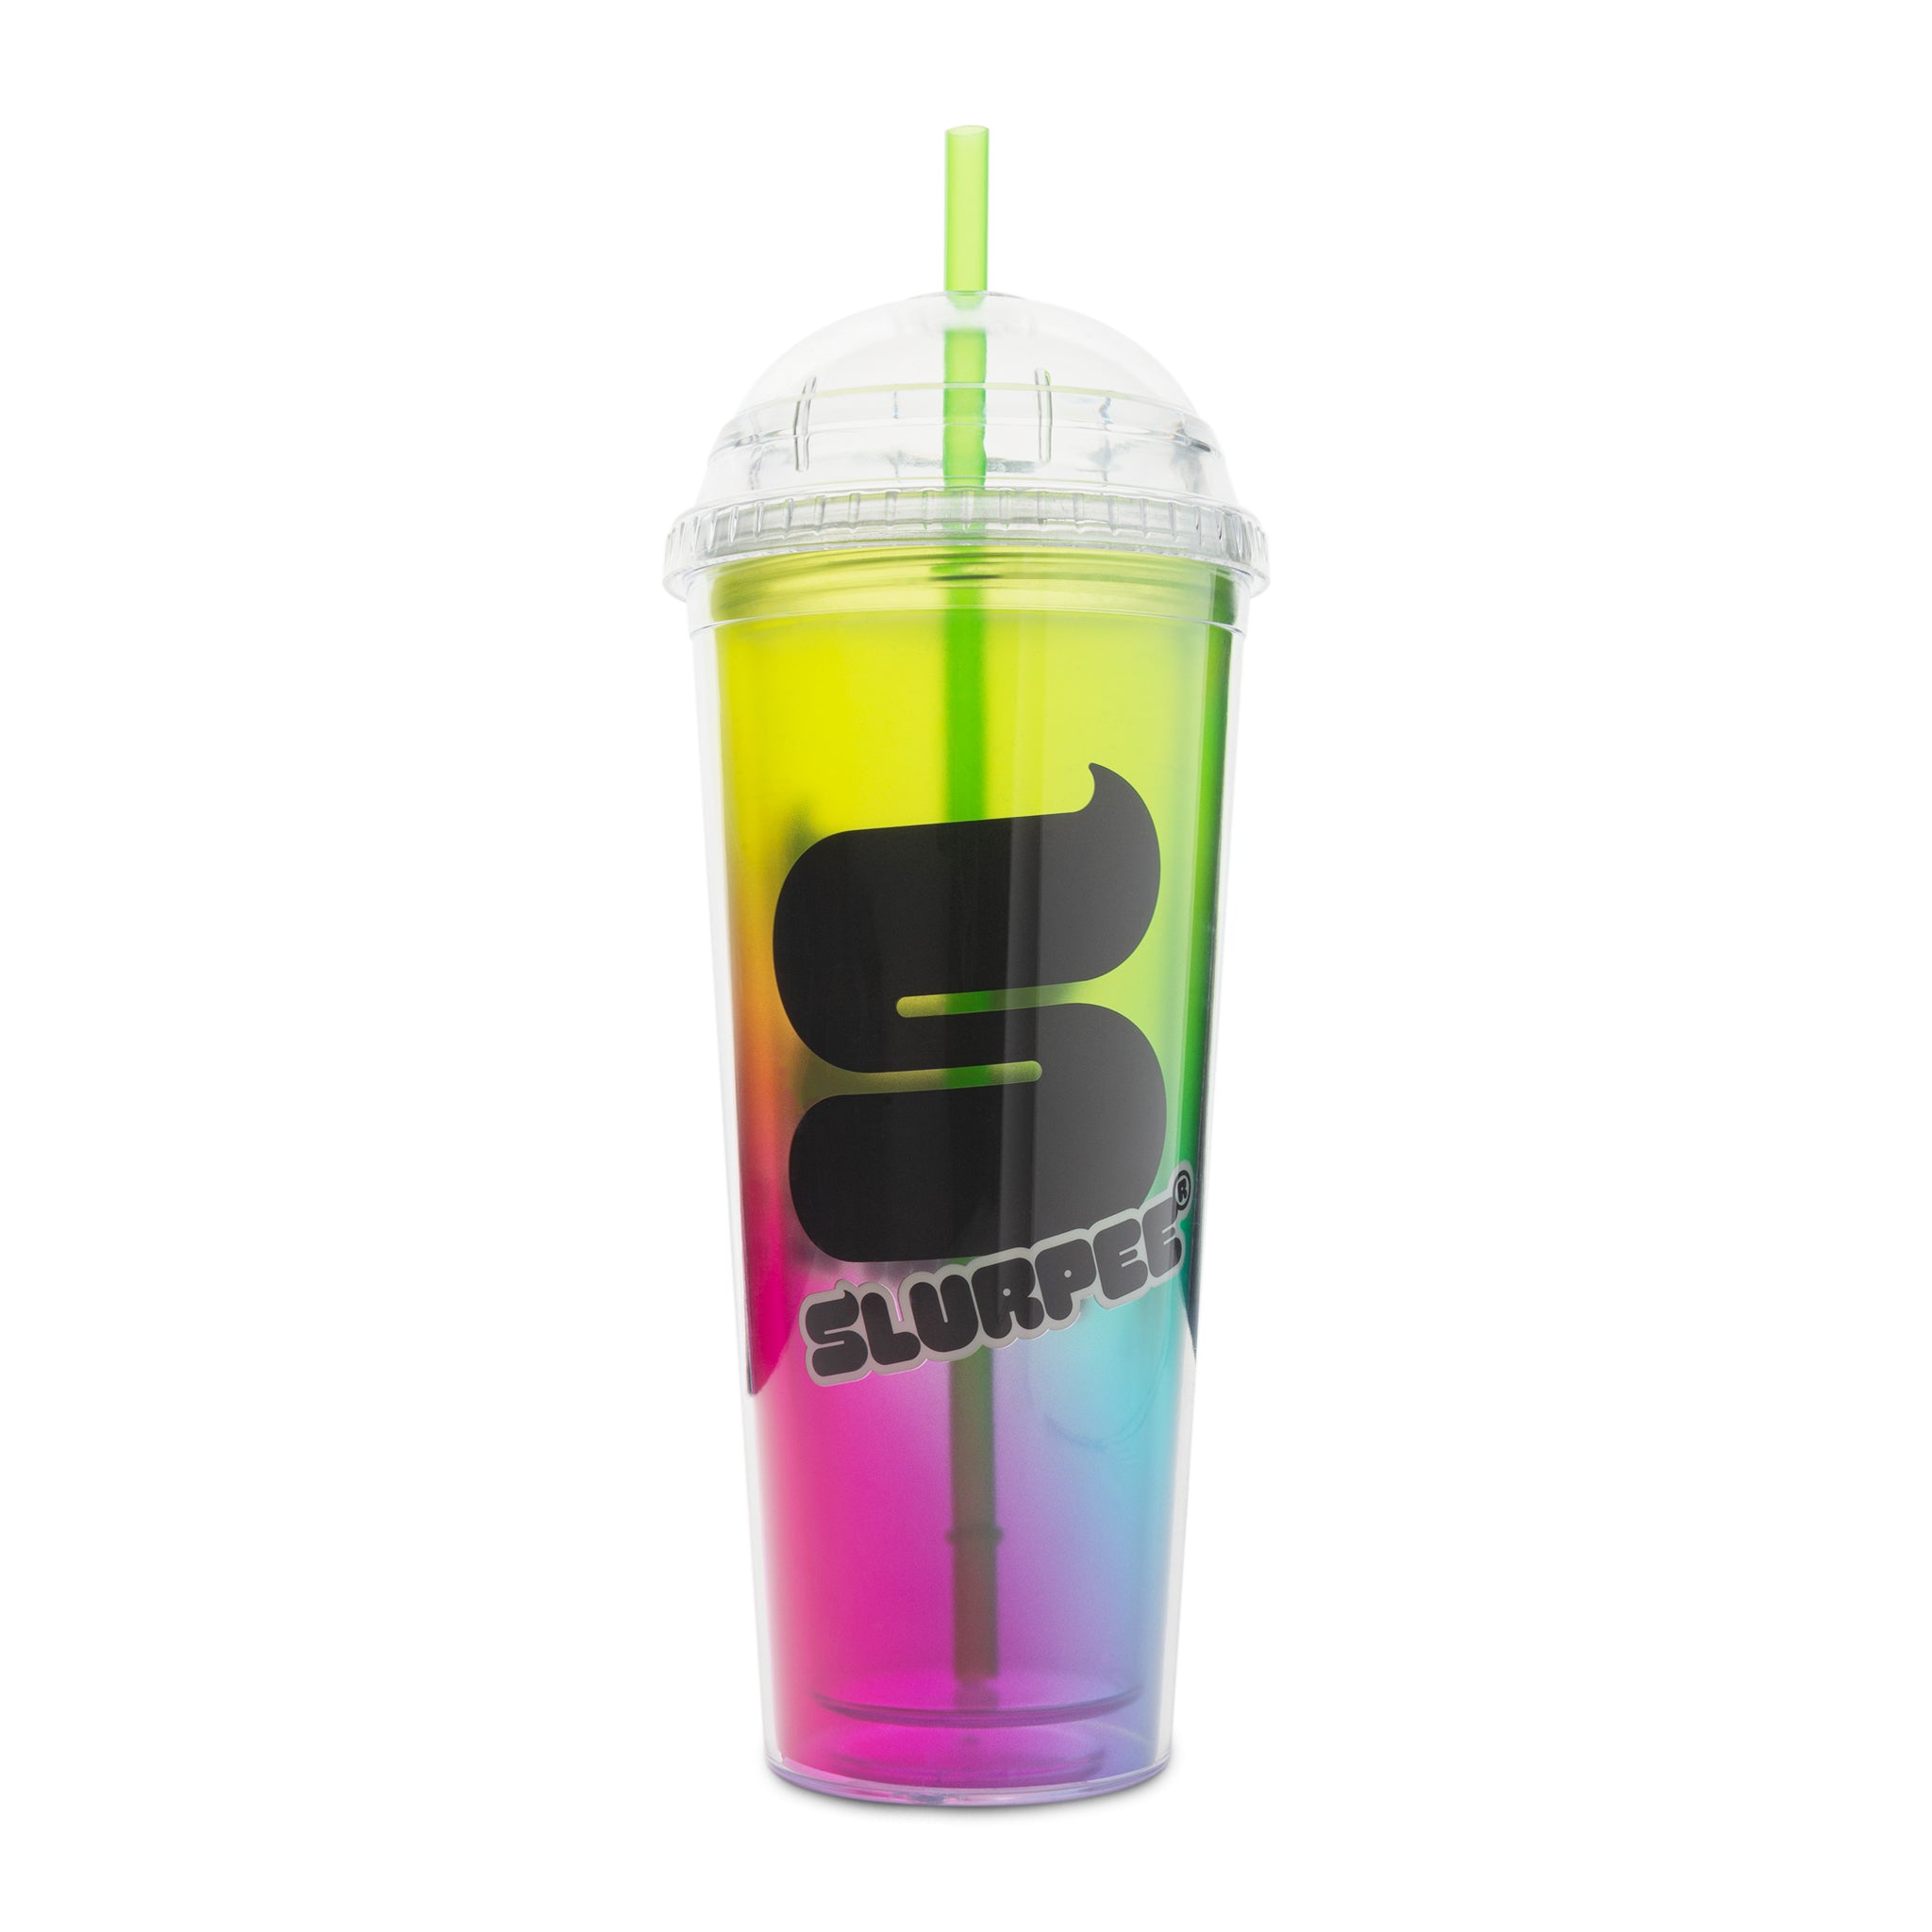 7-Eleven Releases Stay Cold Cup for Slurpee Drinks